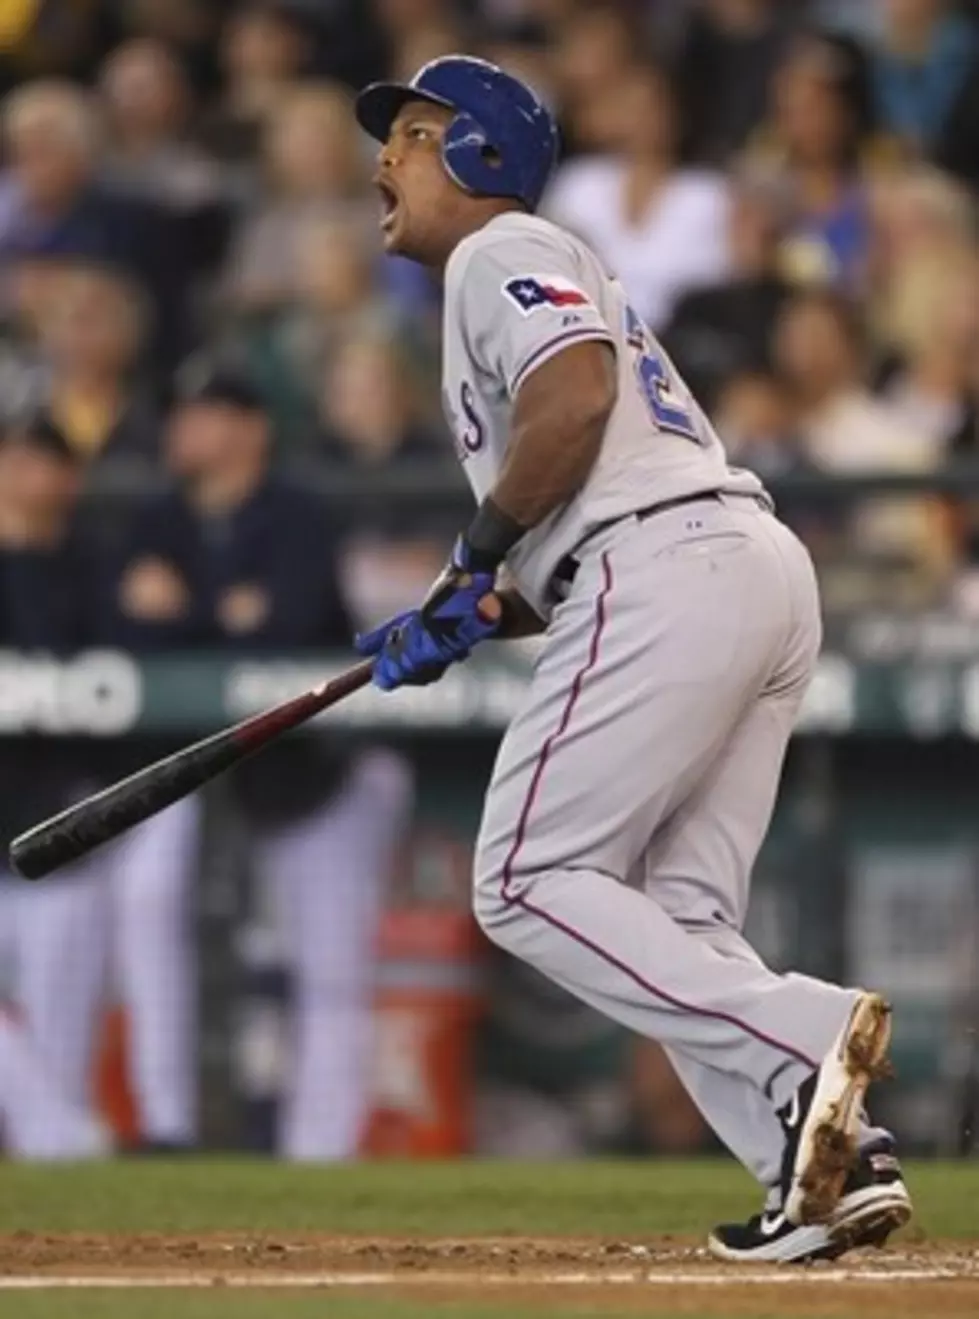 Texas Rangers Cut Their Magic Number Down to 6 After Beating the Seattle Mariners